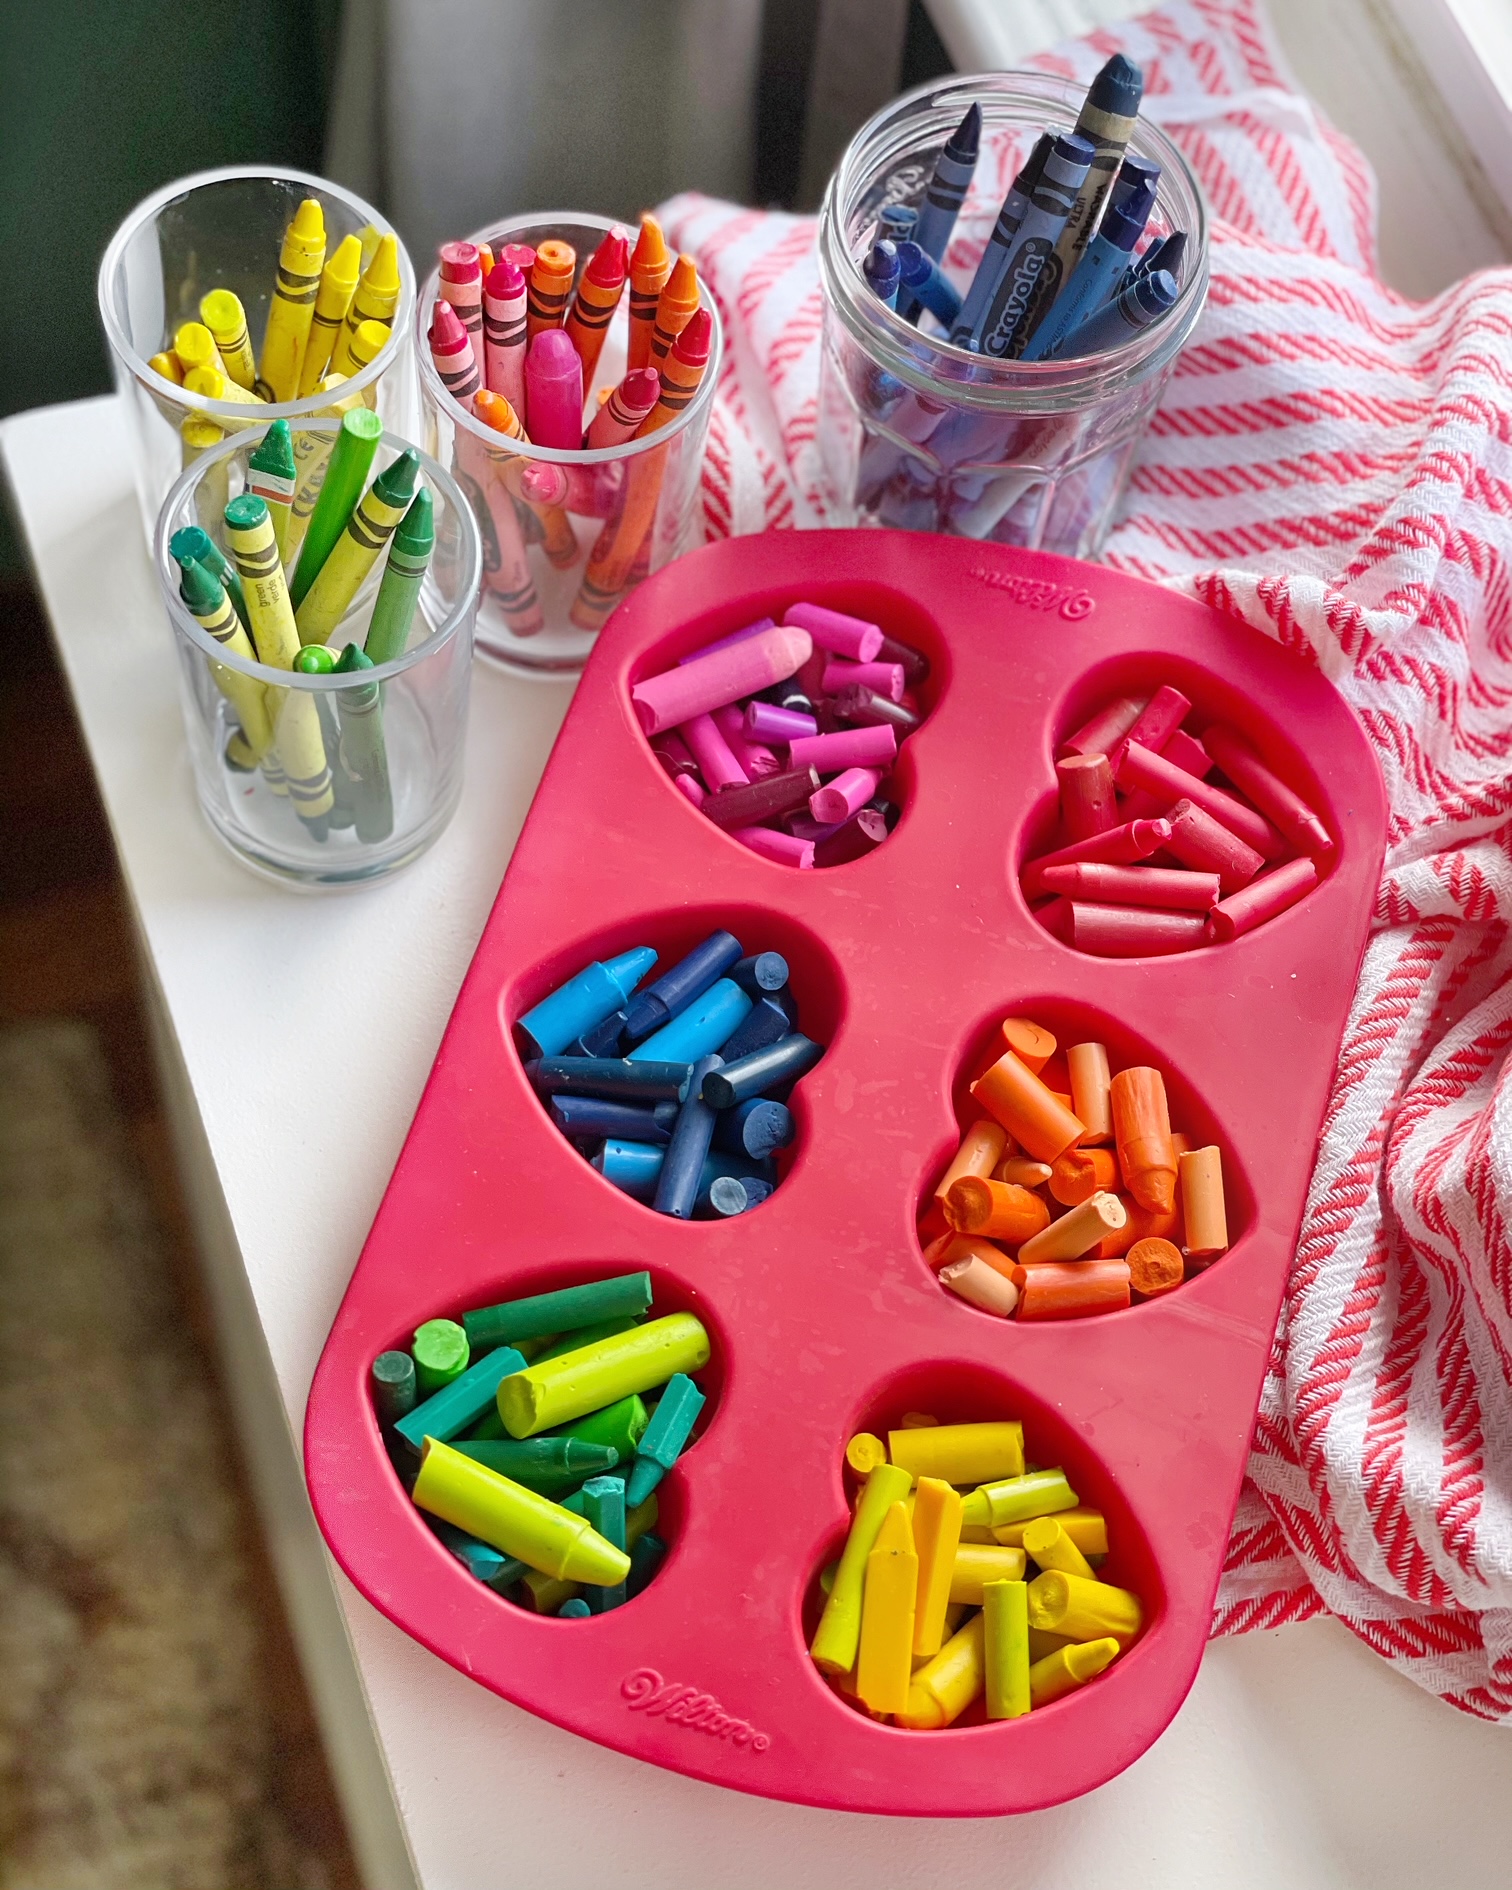 Handmade By Erica: Recycled Crayons